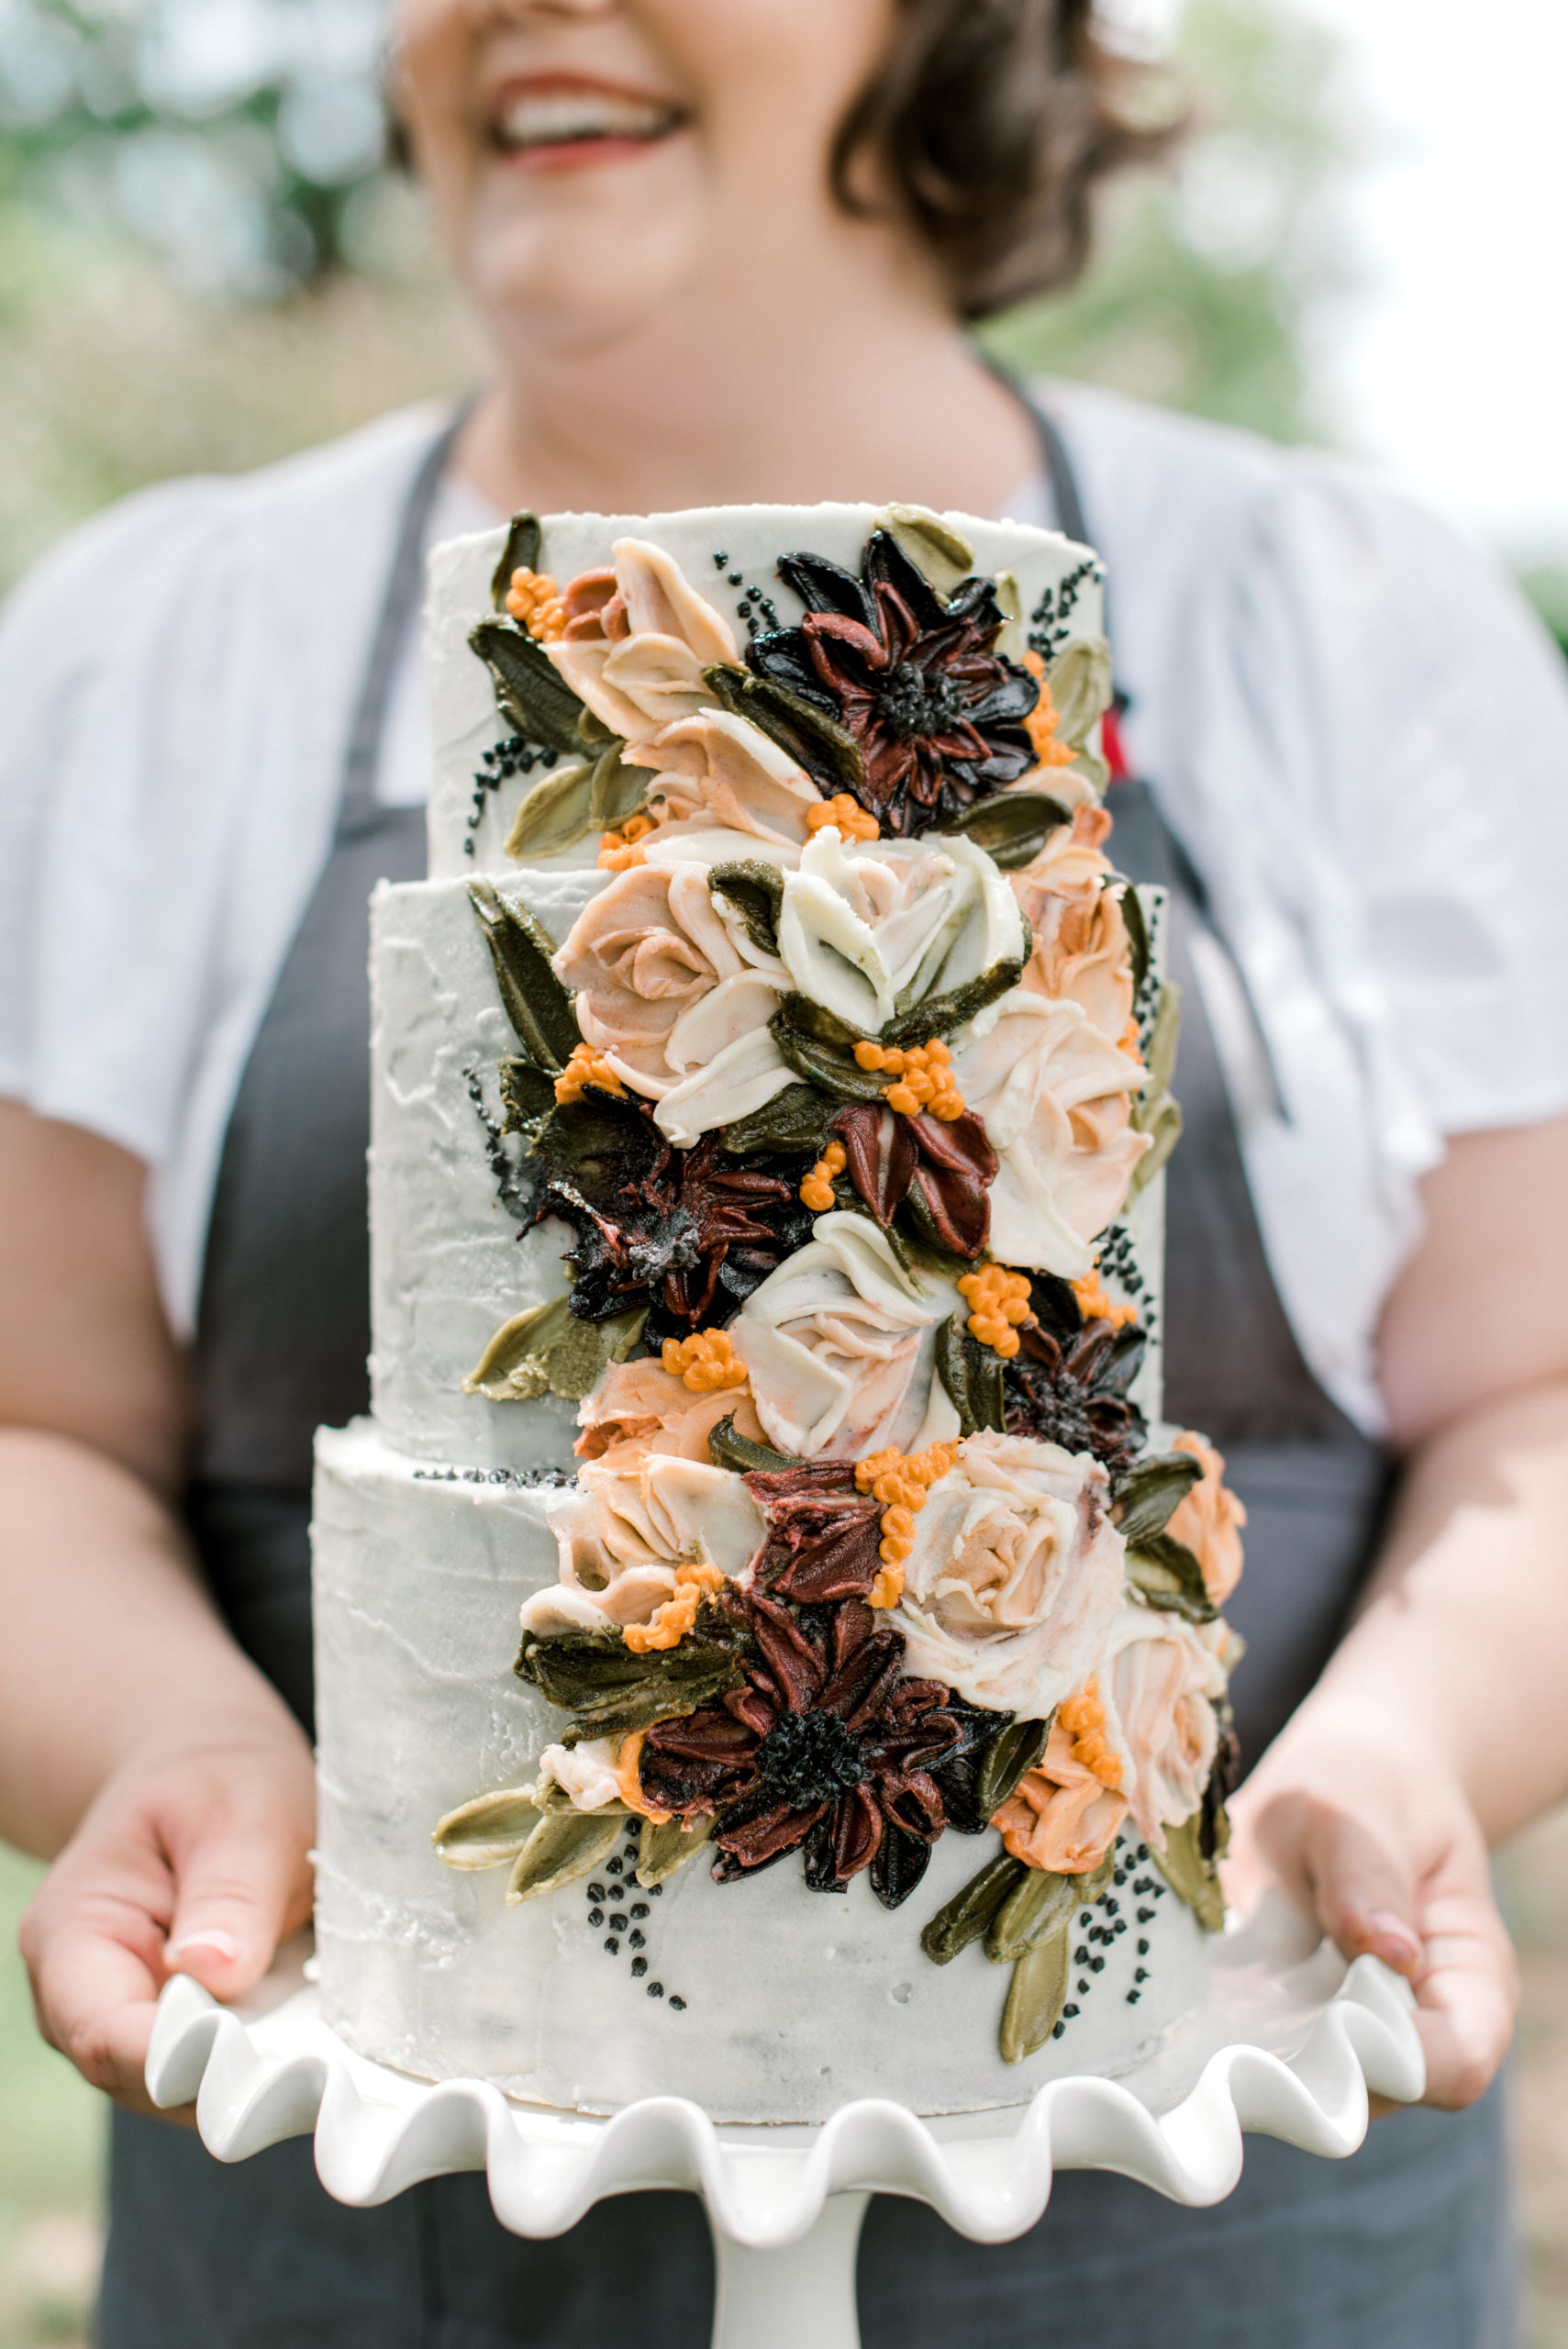 10 Bloom Cake - Cake table of sculpted butter cream wedding cake